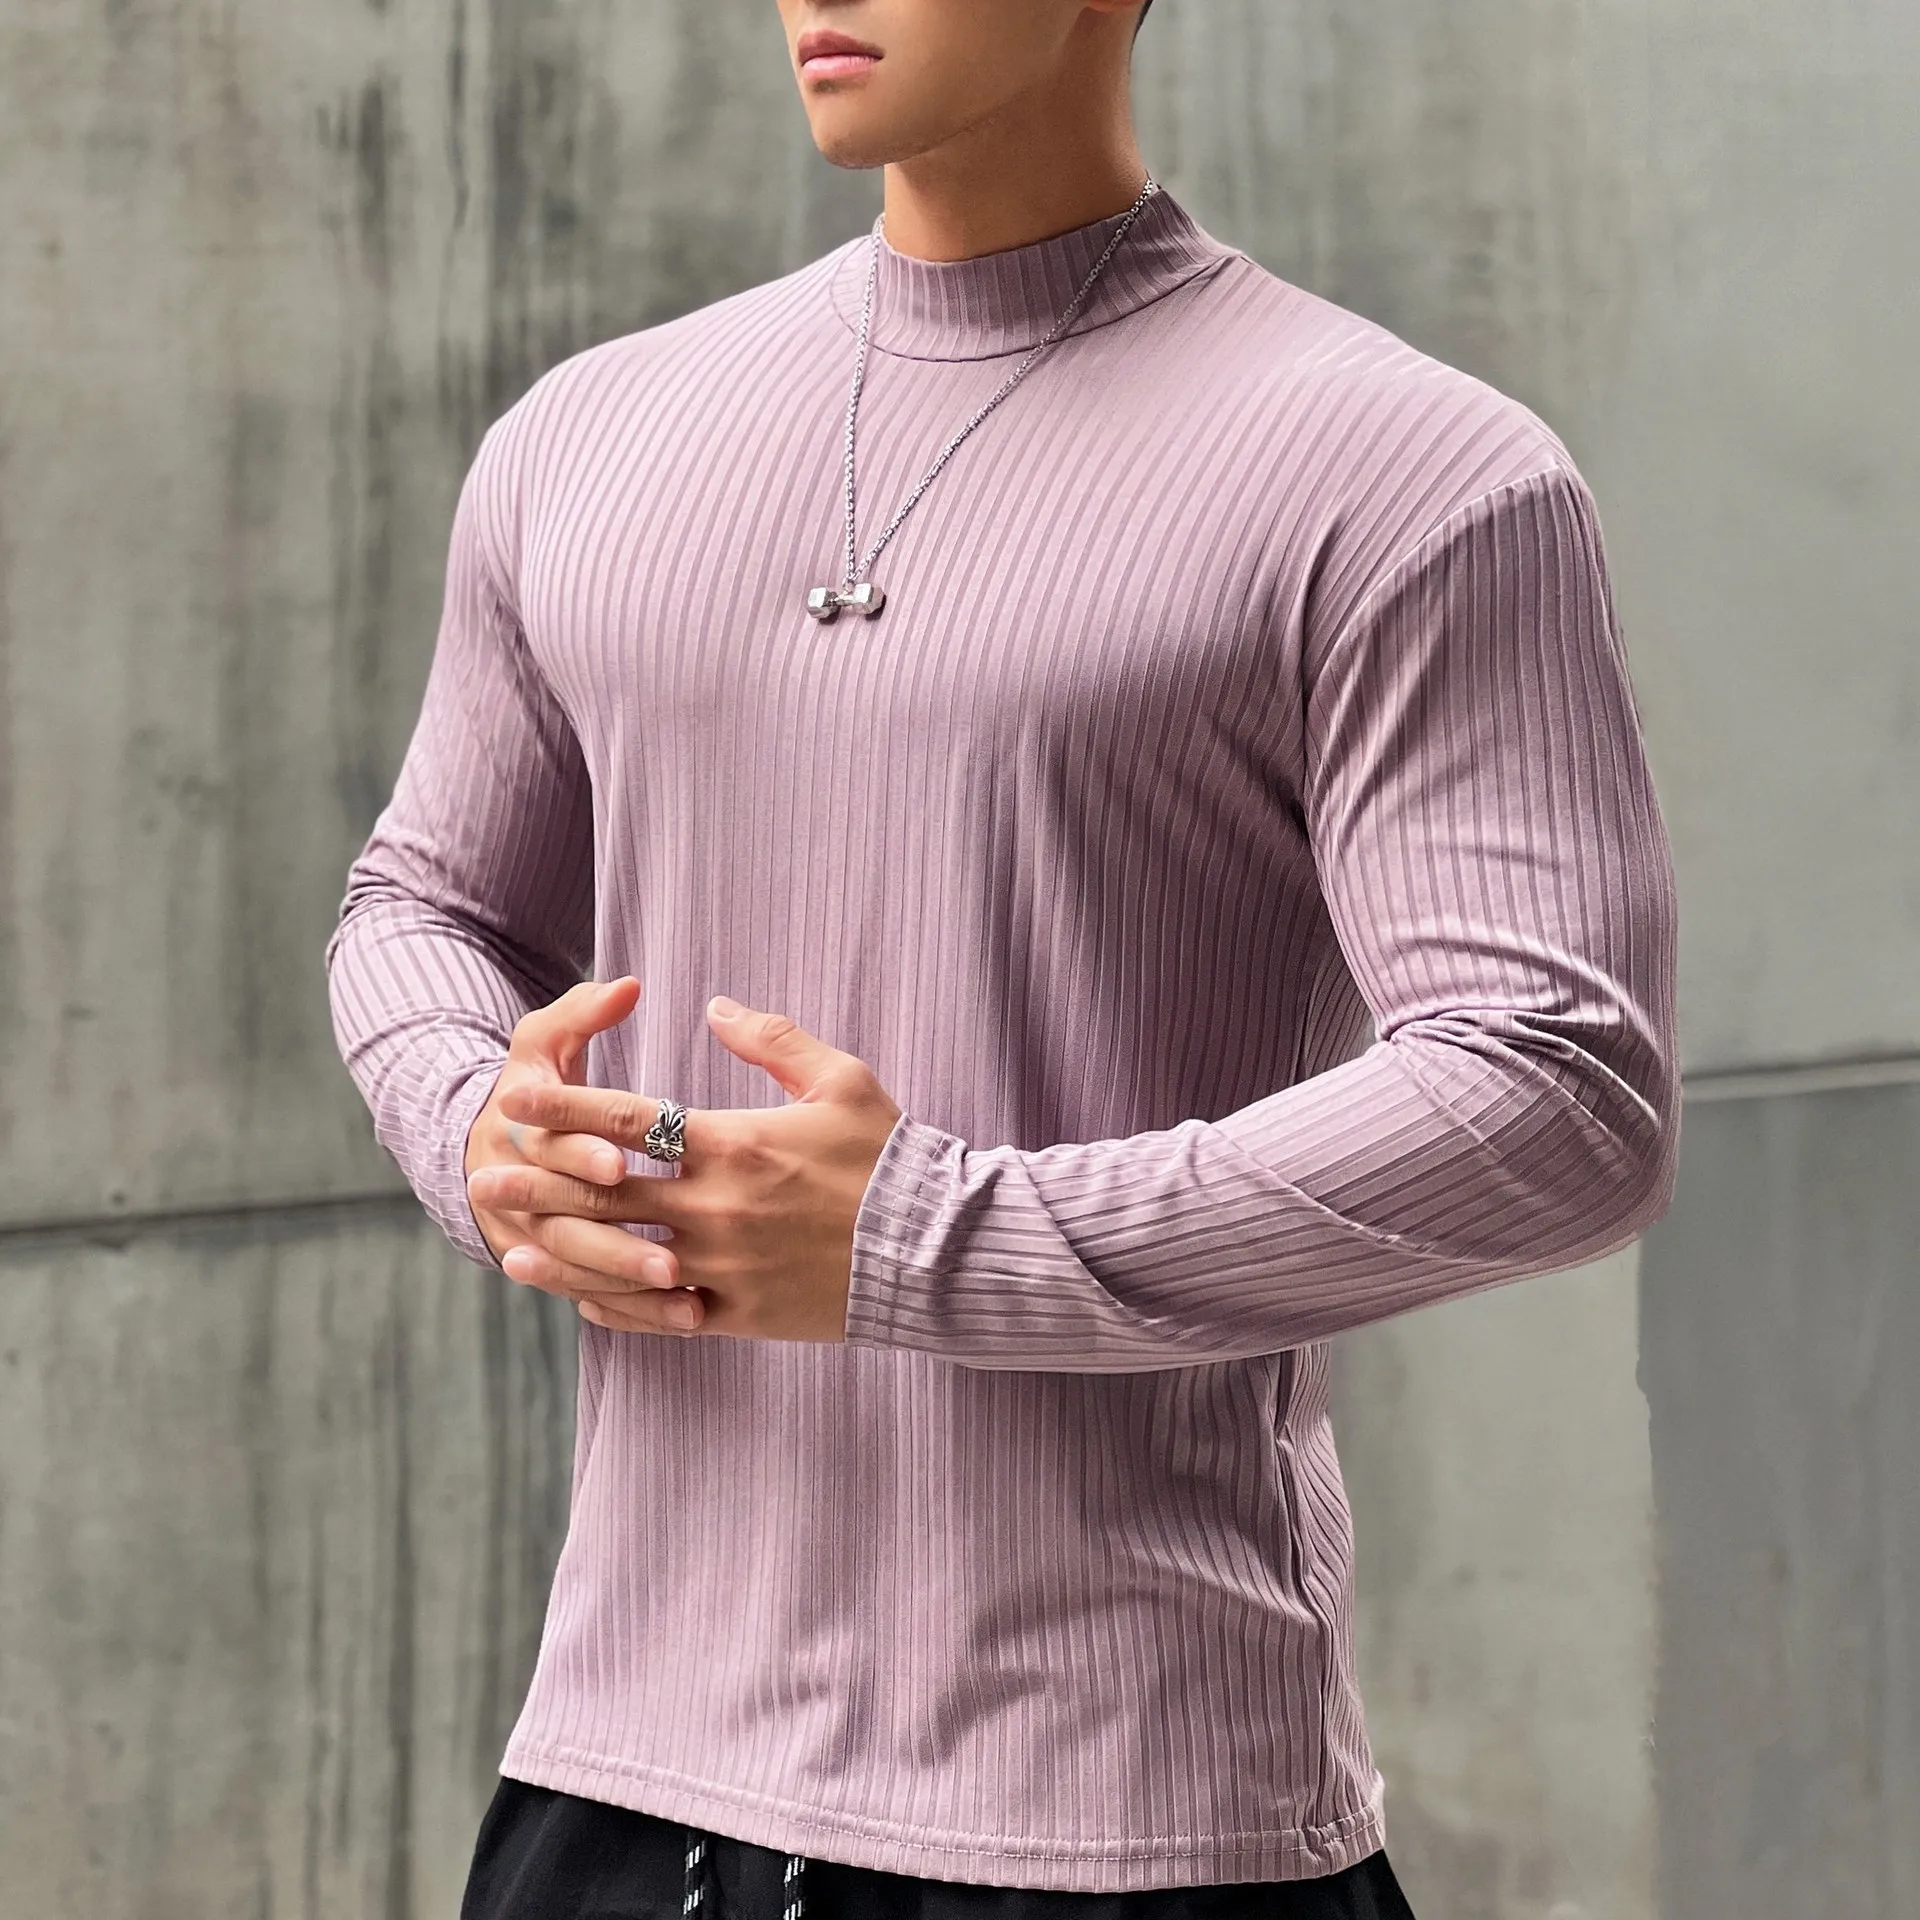 YIYI Autumn Ribbed High Elastic Workout T-shirts Men Pull Over Quick Dry Breathable Sports T-shirts Long Sleeve T-shirt For Men